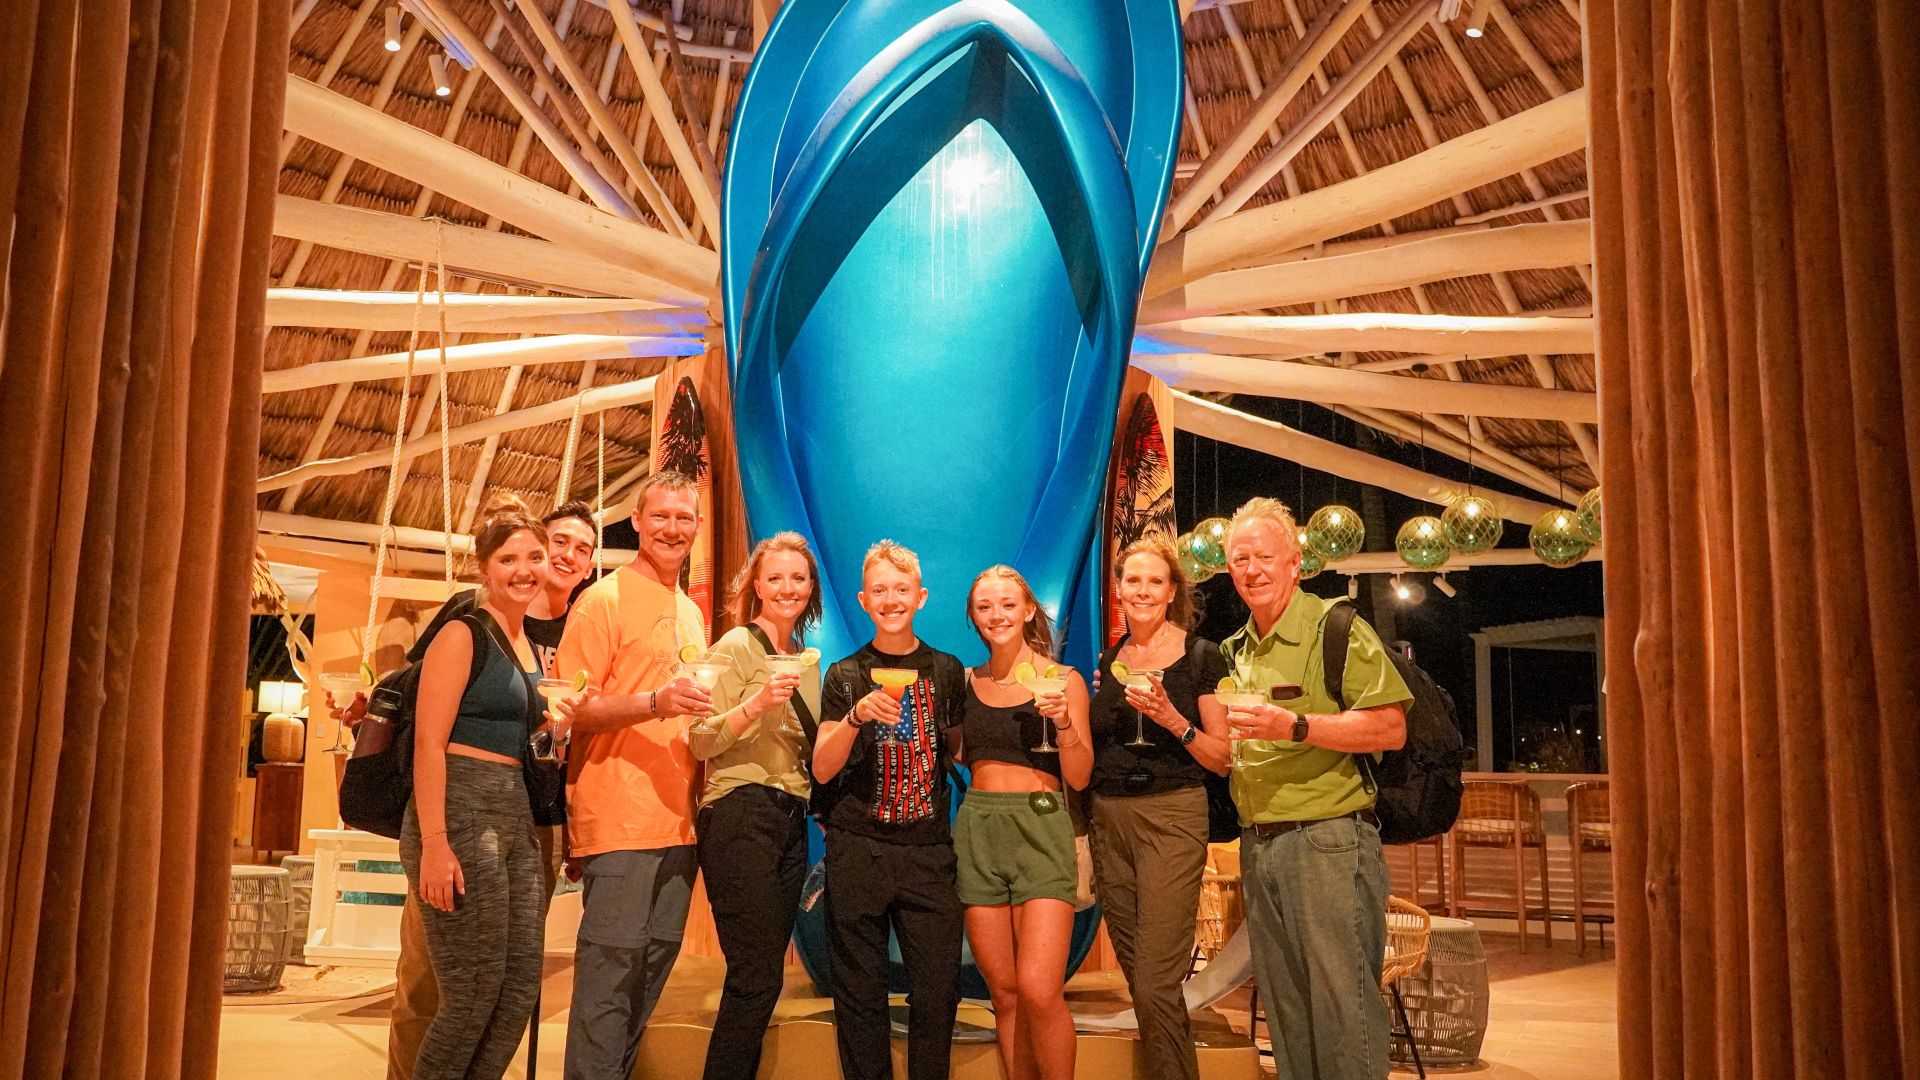 A Group Of People Posing For A Photo In Front Of A Large Blue Balloon